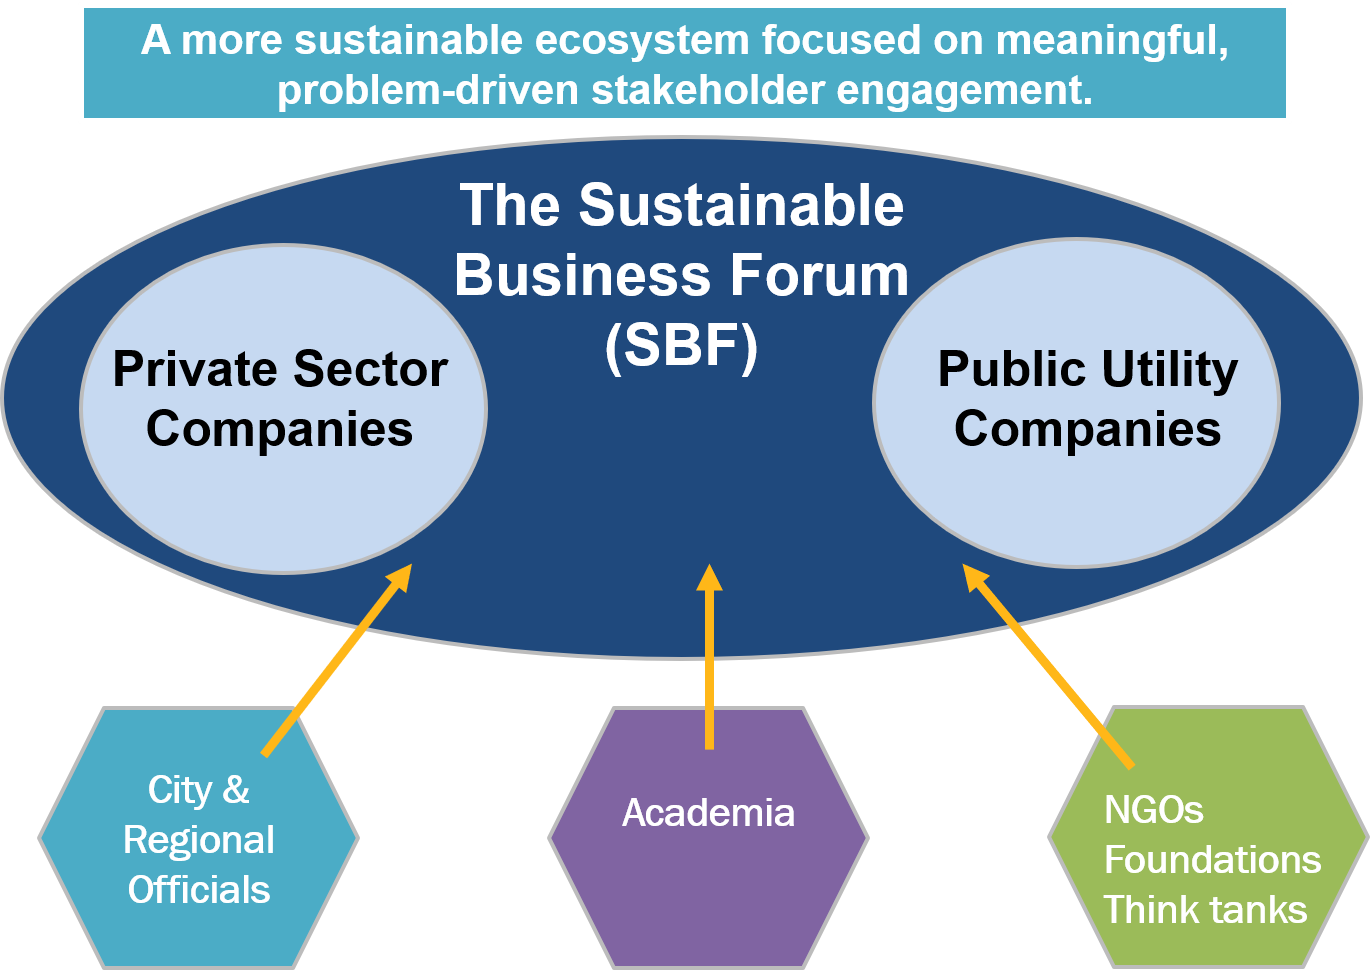 A graphic summarizing the business forum's functions.